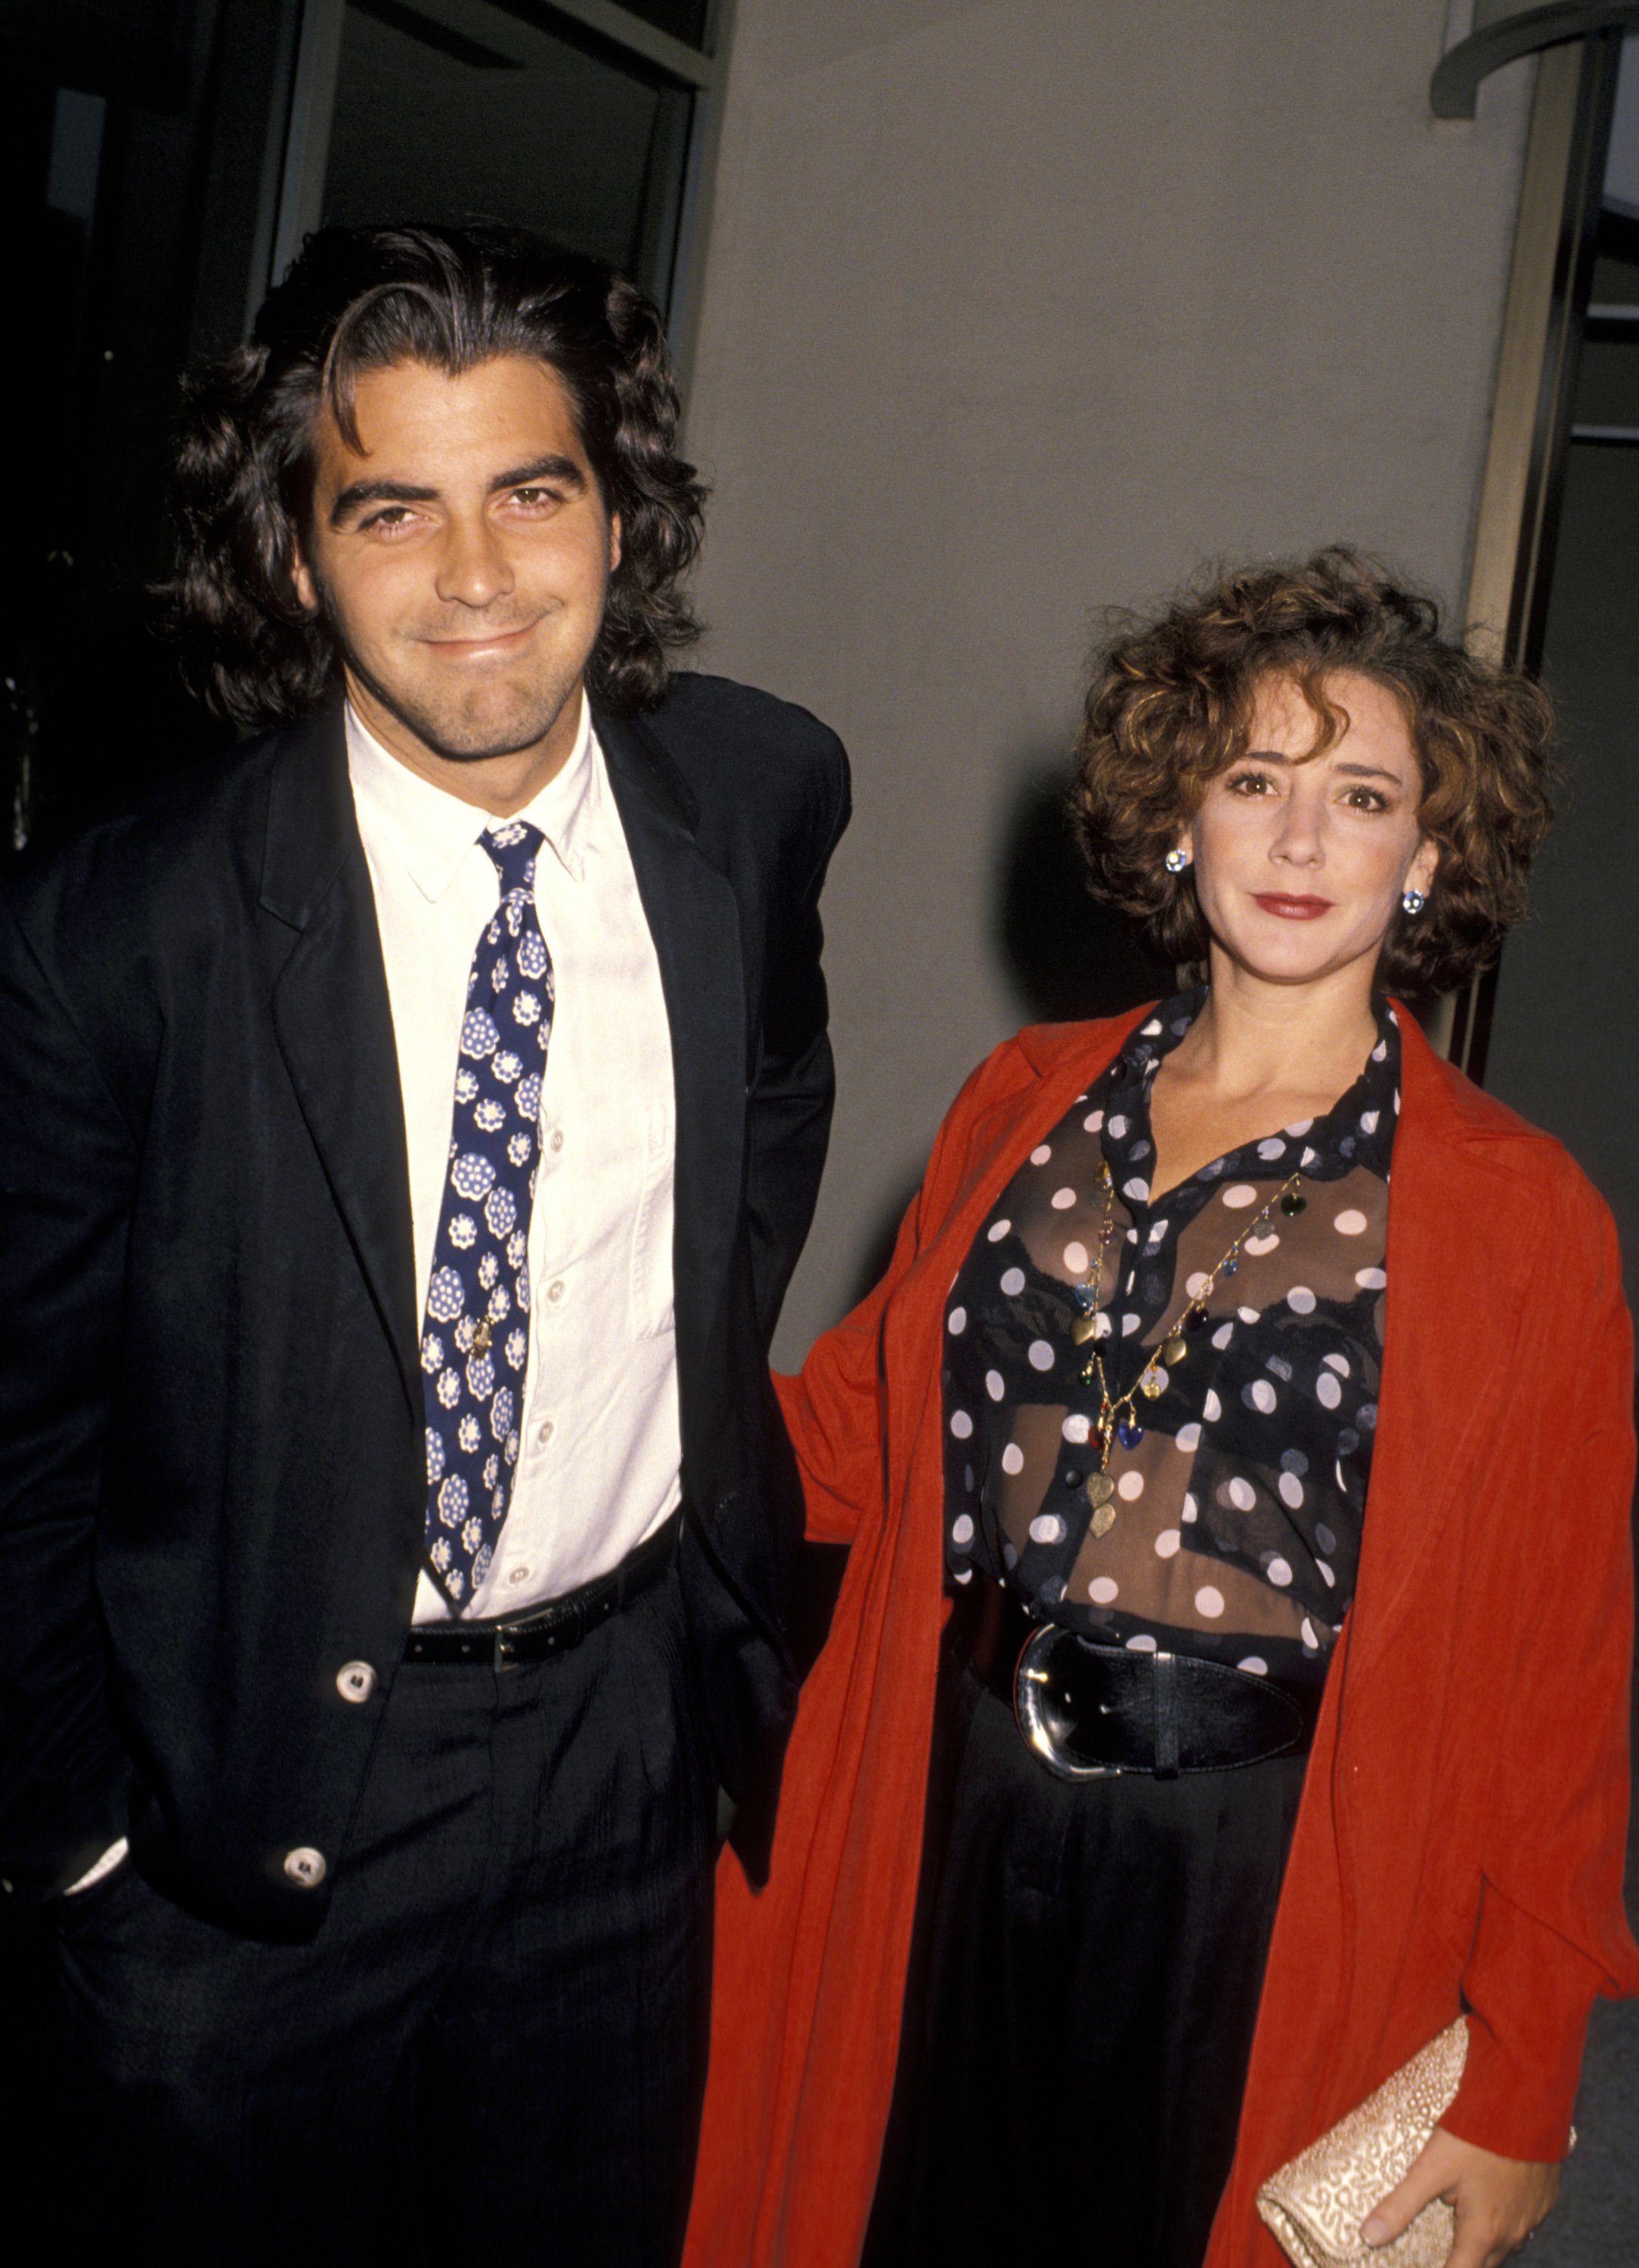 George Clooney and his wife actress Talia Balsam during the ABC Annual Fall Affiliates Dinner on June 14, 1990. / Source: Getty Images